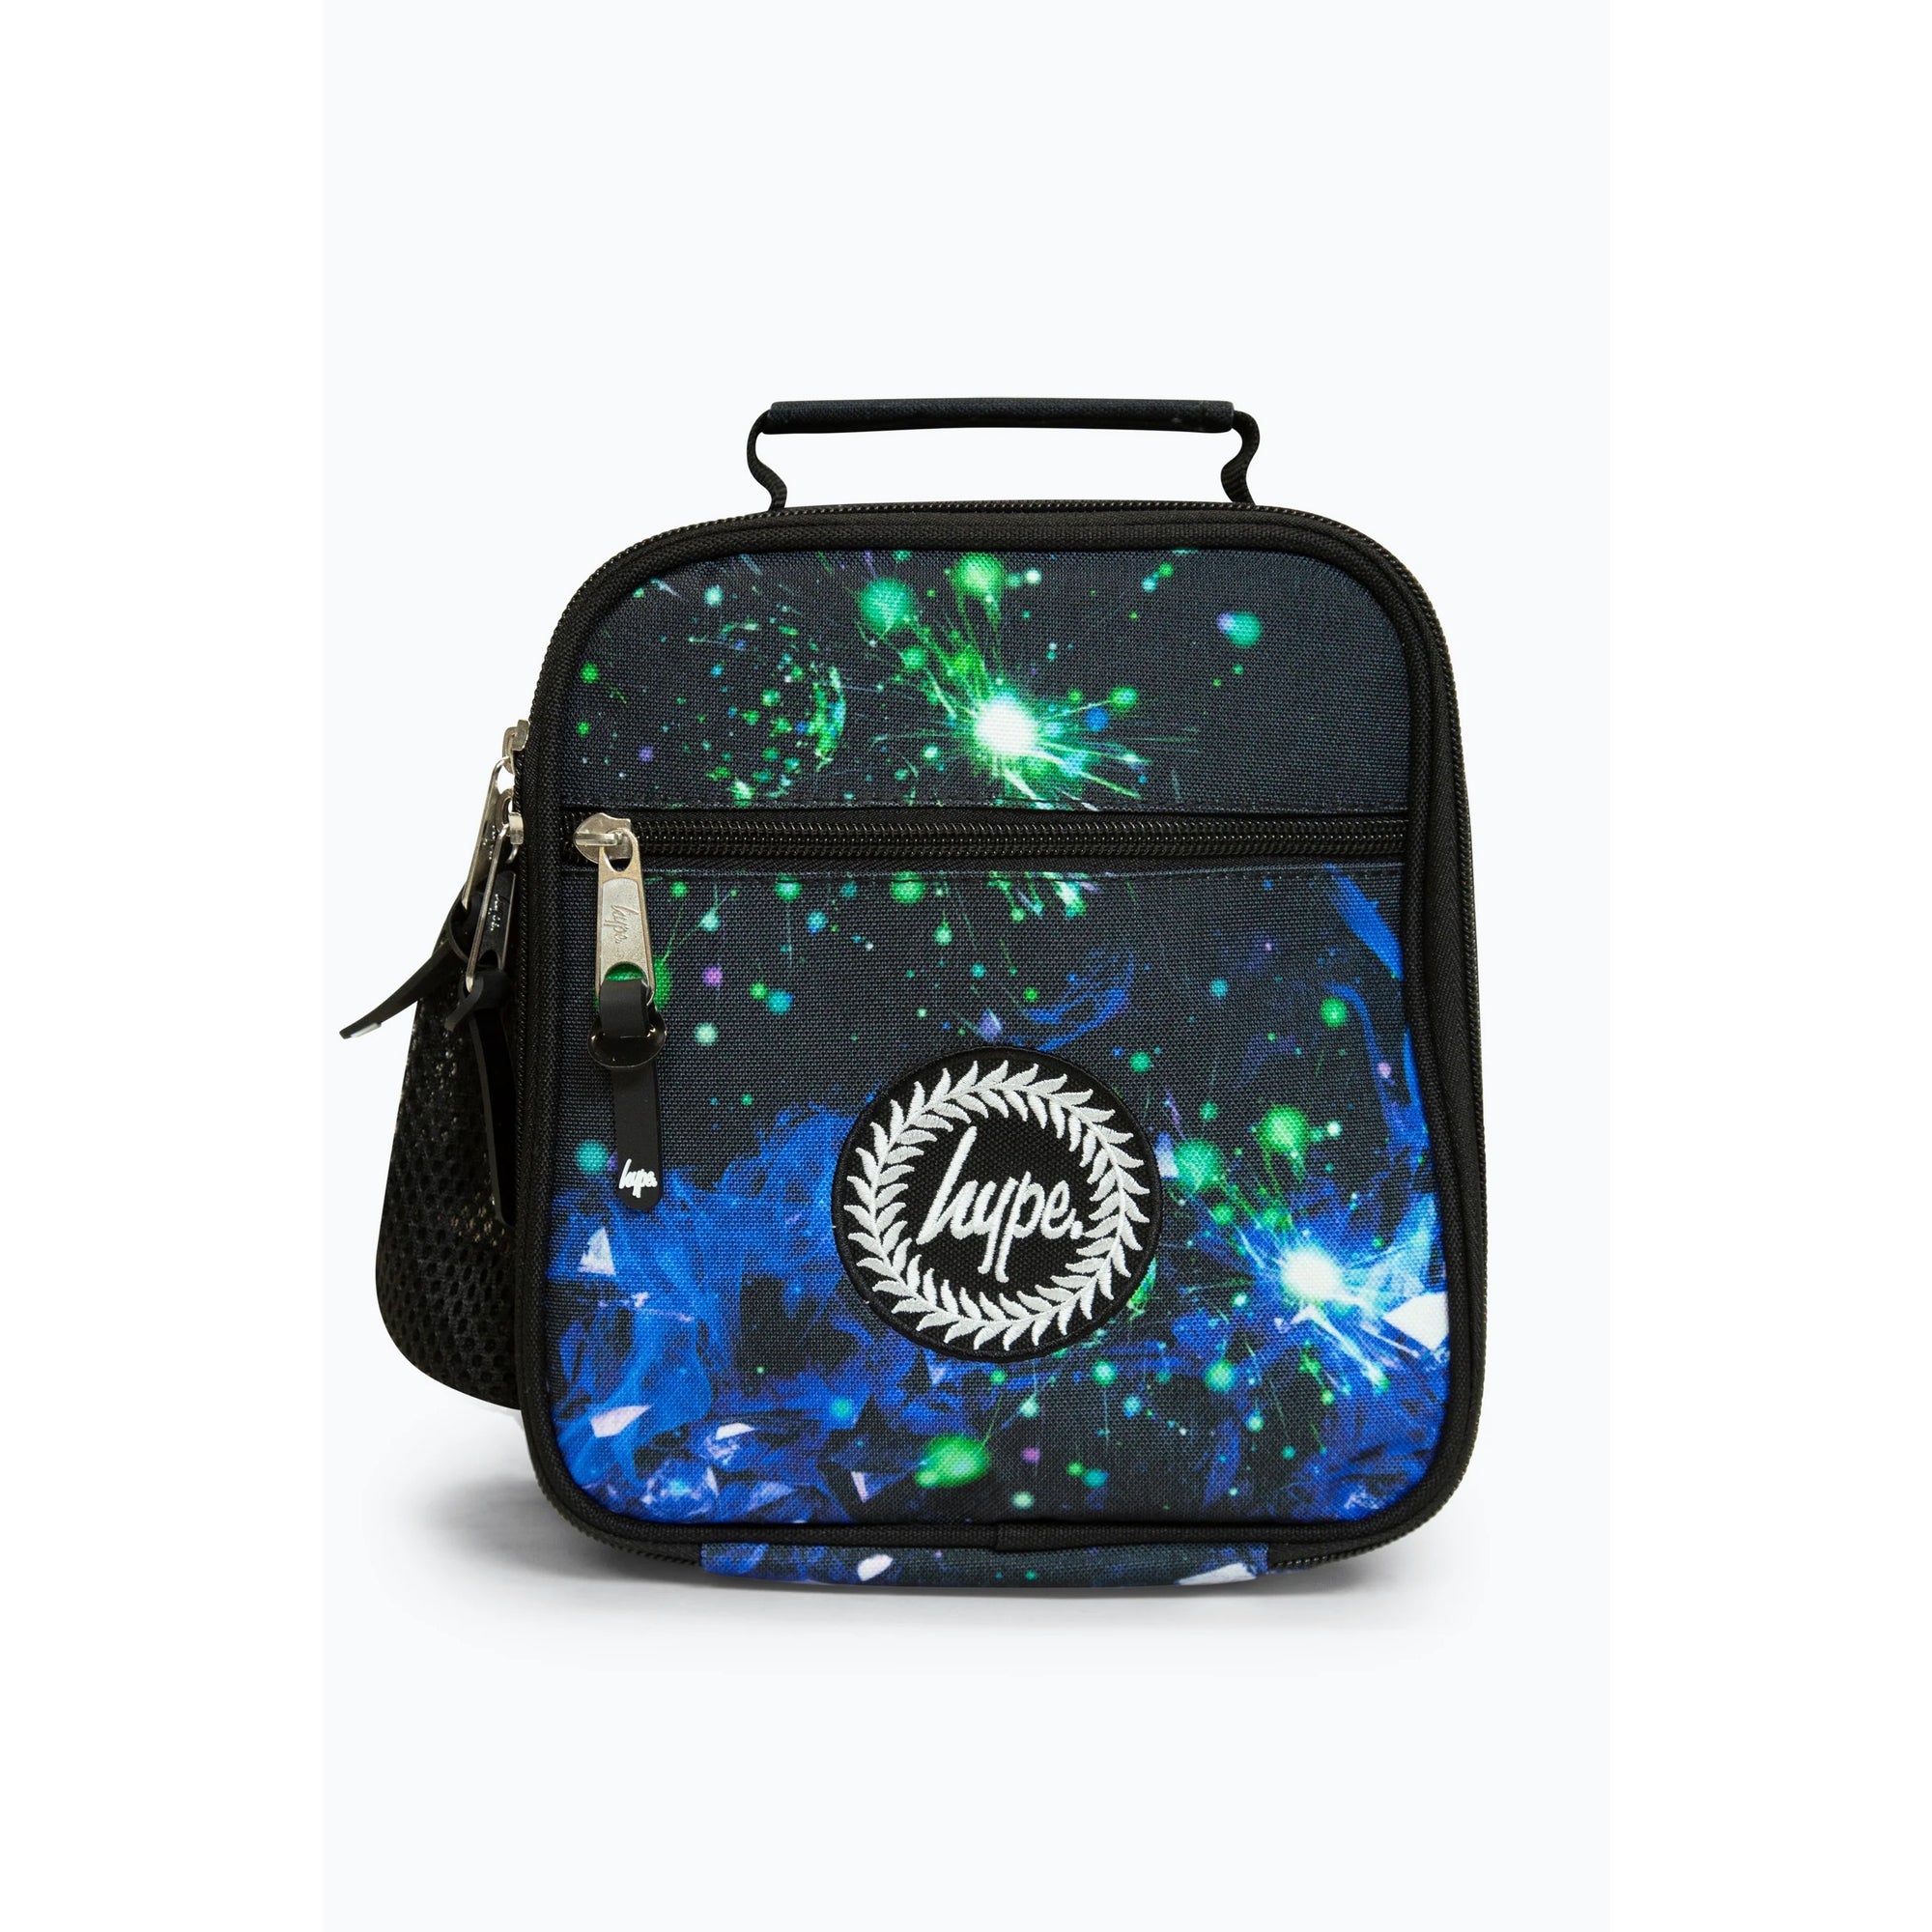 Hype Black Cosmos Lunch Bag Xtlr104 Accessories ONE SIZE / Multi